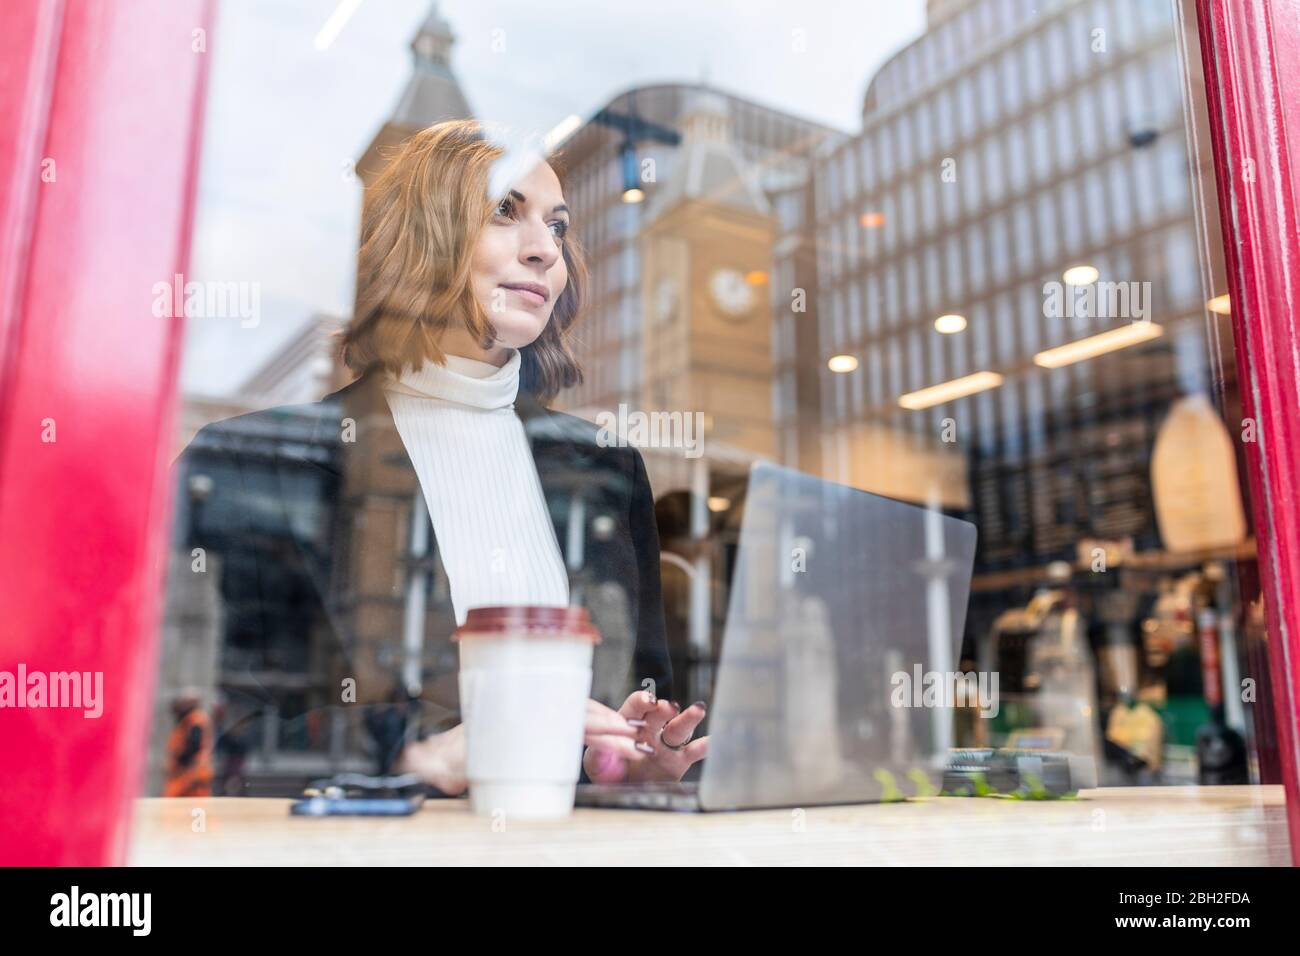 Businesswoman using laptop at a cafe in the city Stock Photo